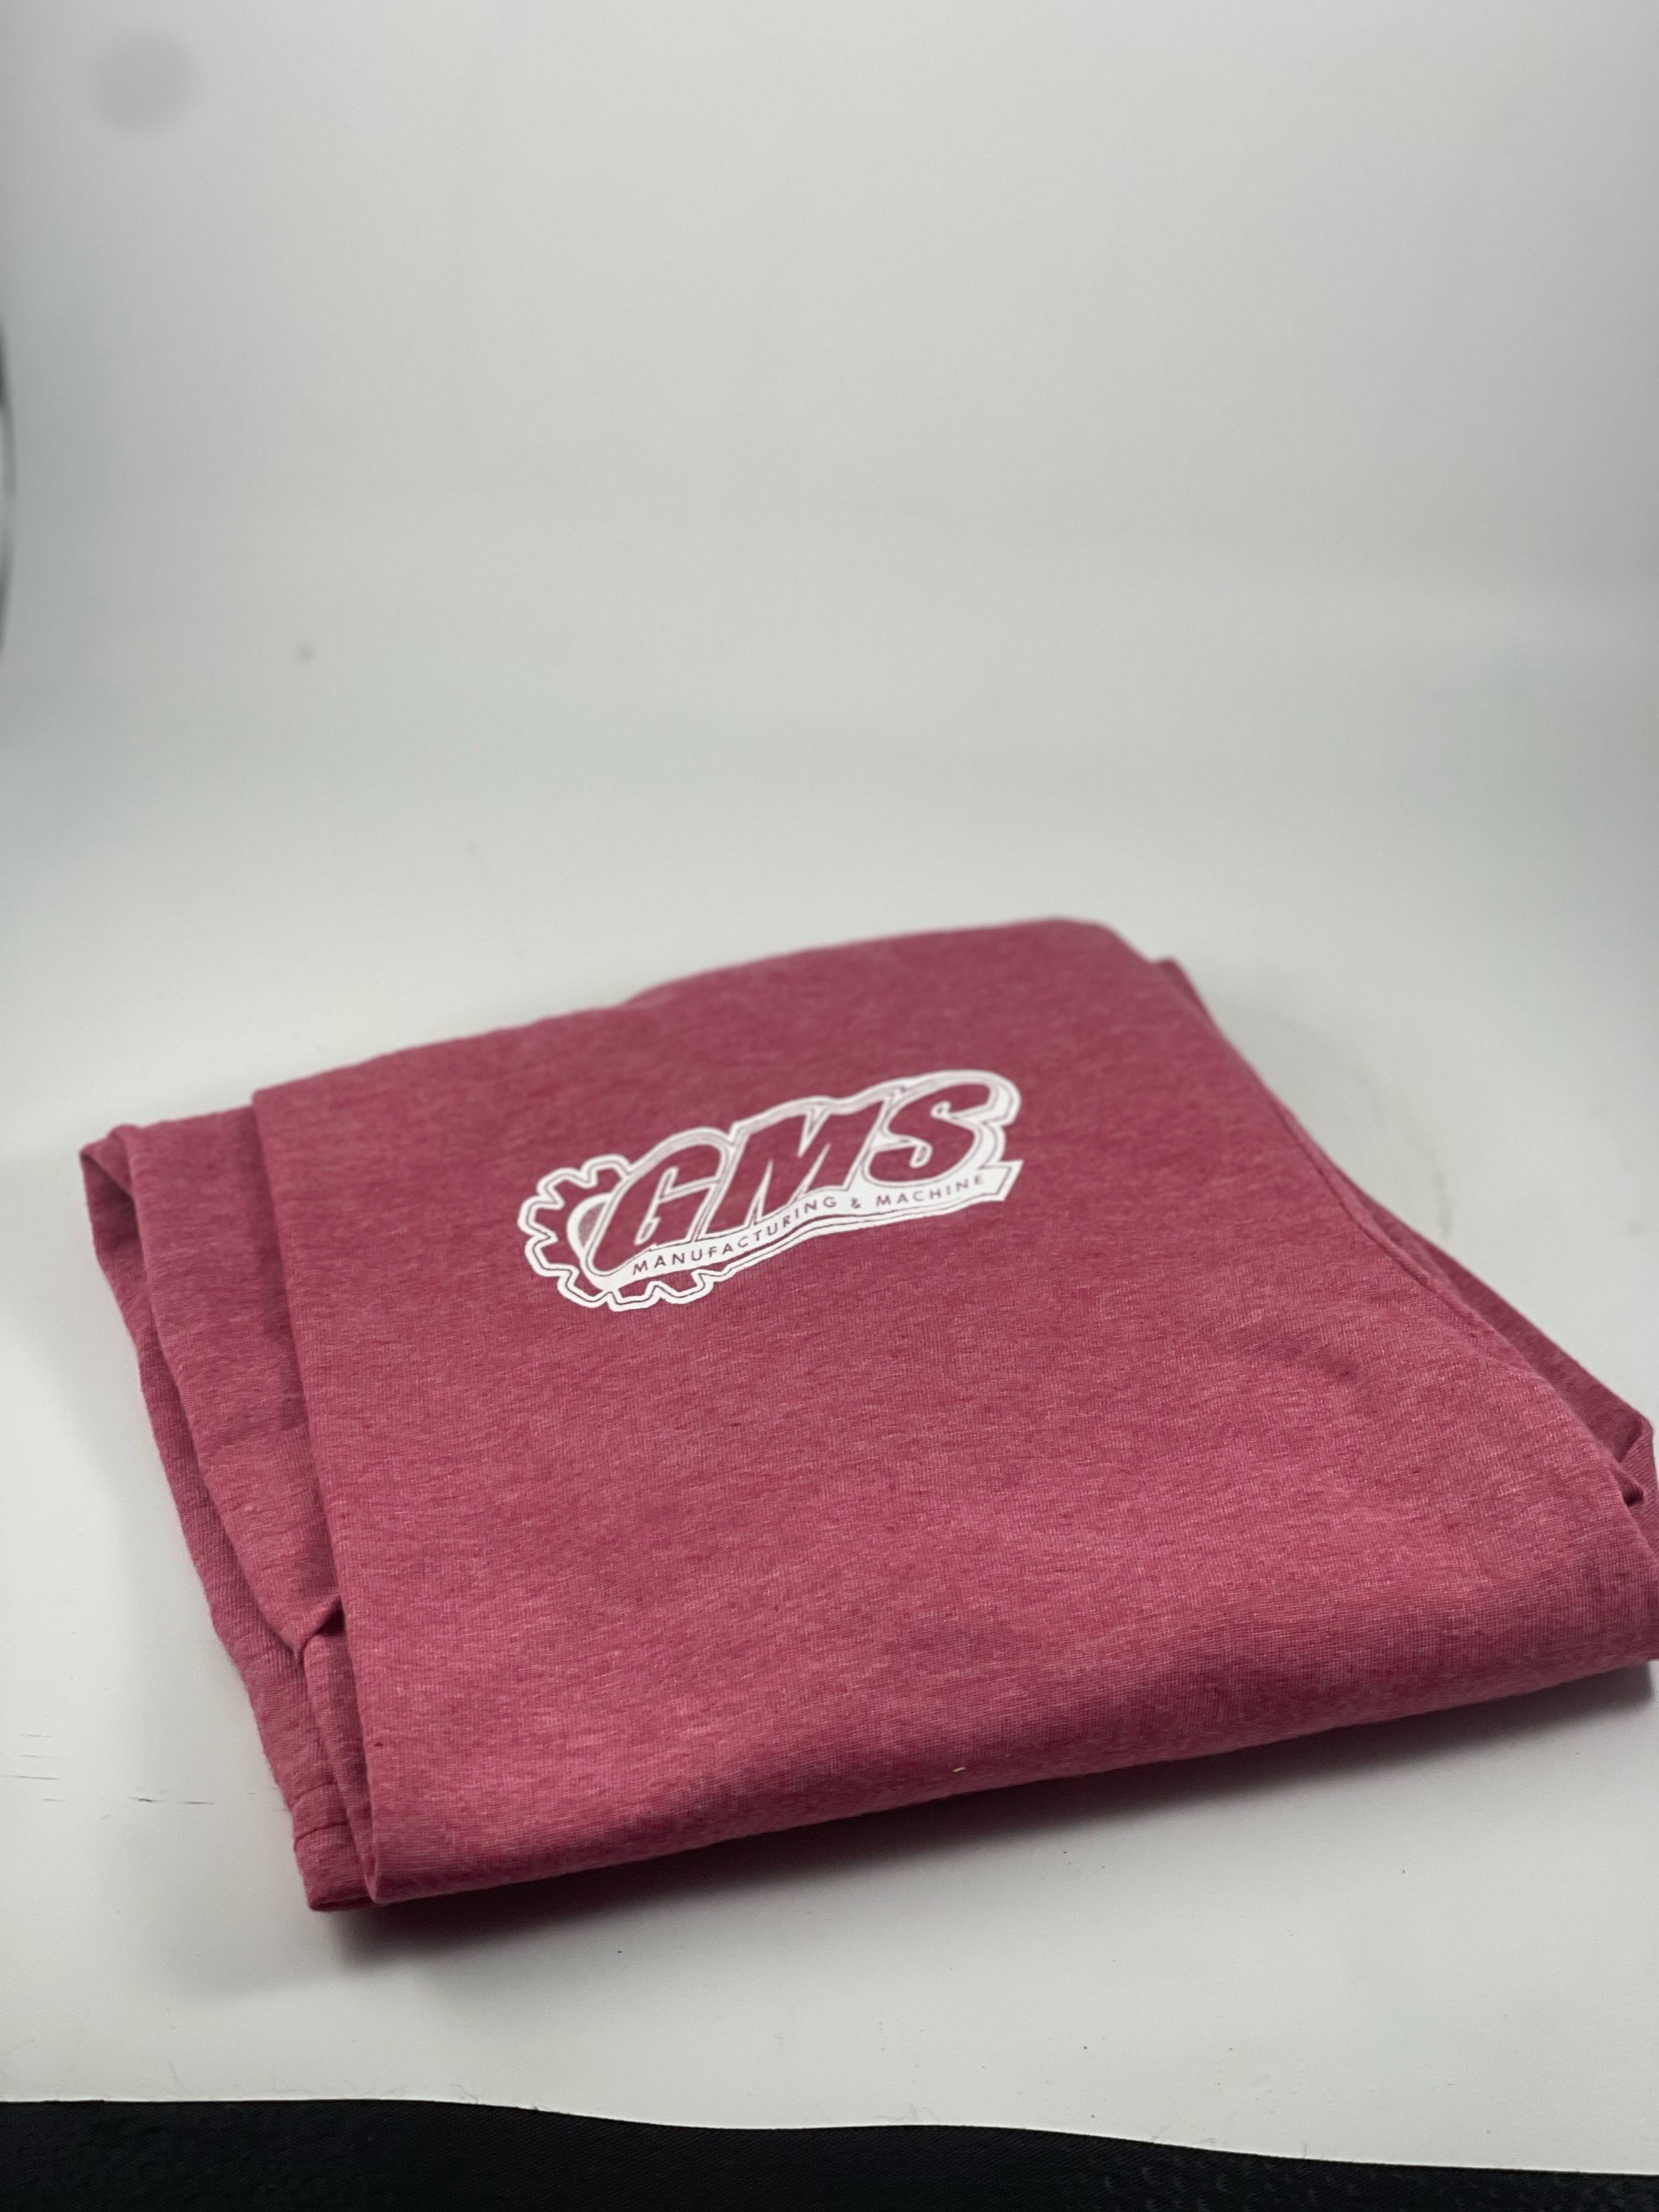 GMS Shop — GMS Manufacturing and Machine